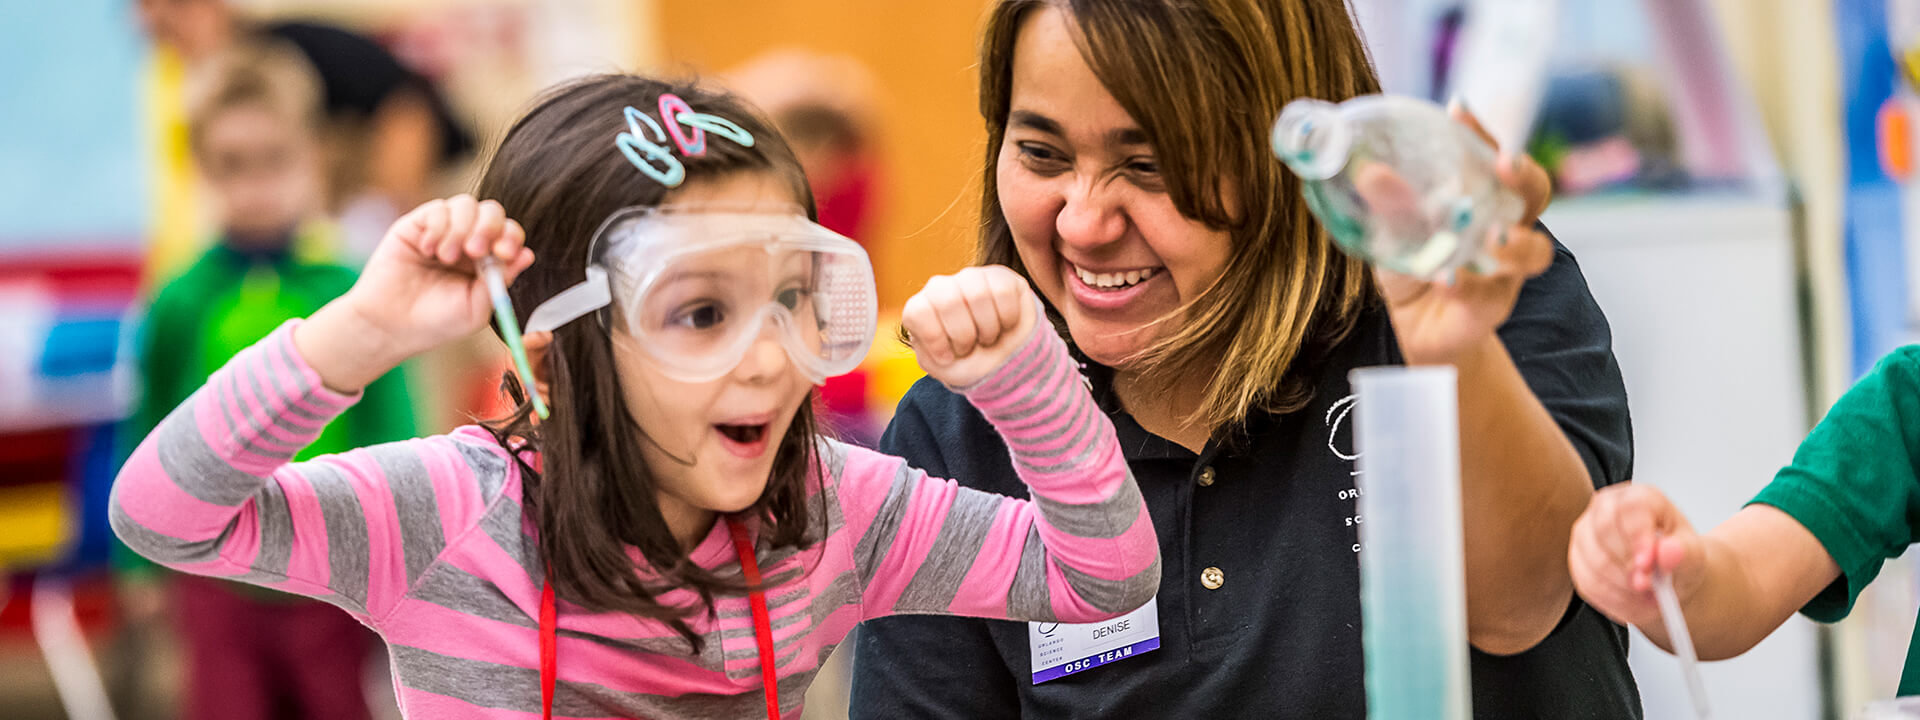 A preschool student shows her excitement during a chemistry experiment.